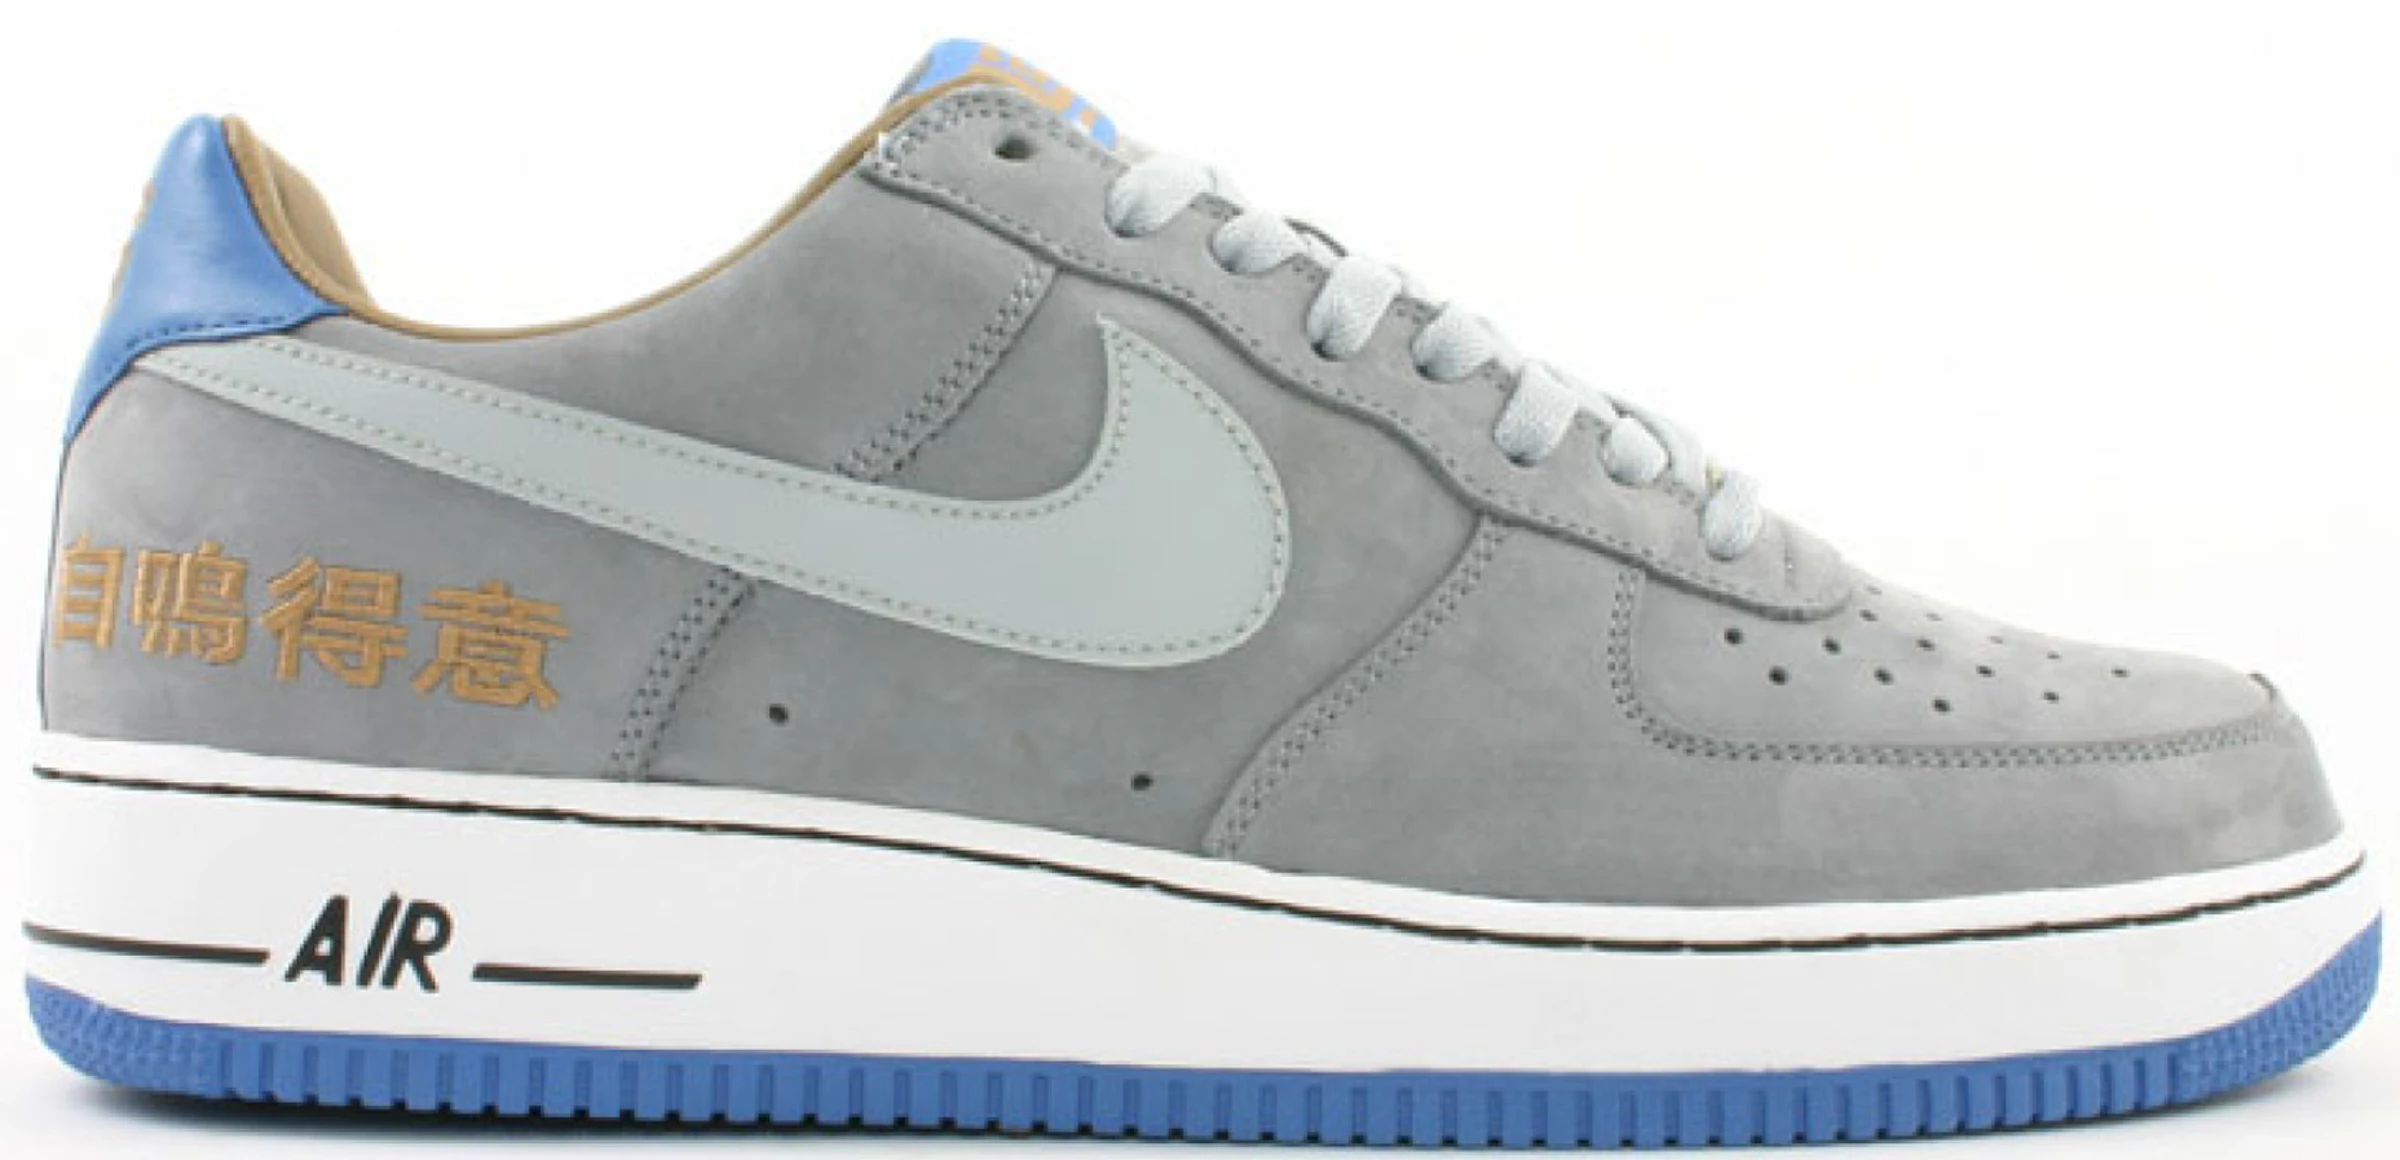 Nike Air 1 Low Chamber of - 311729-001 - ES